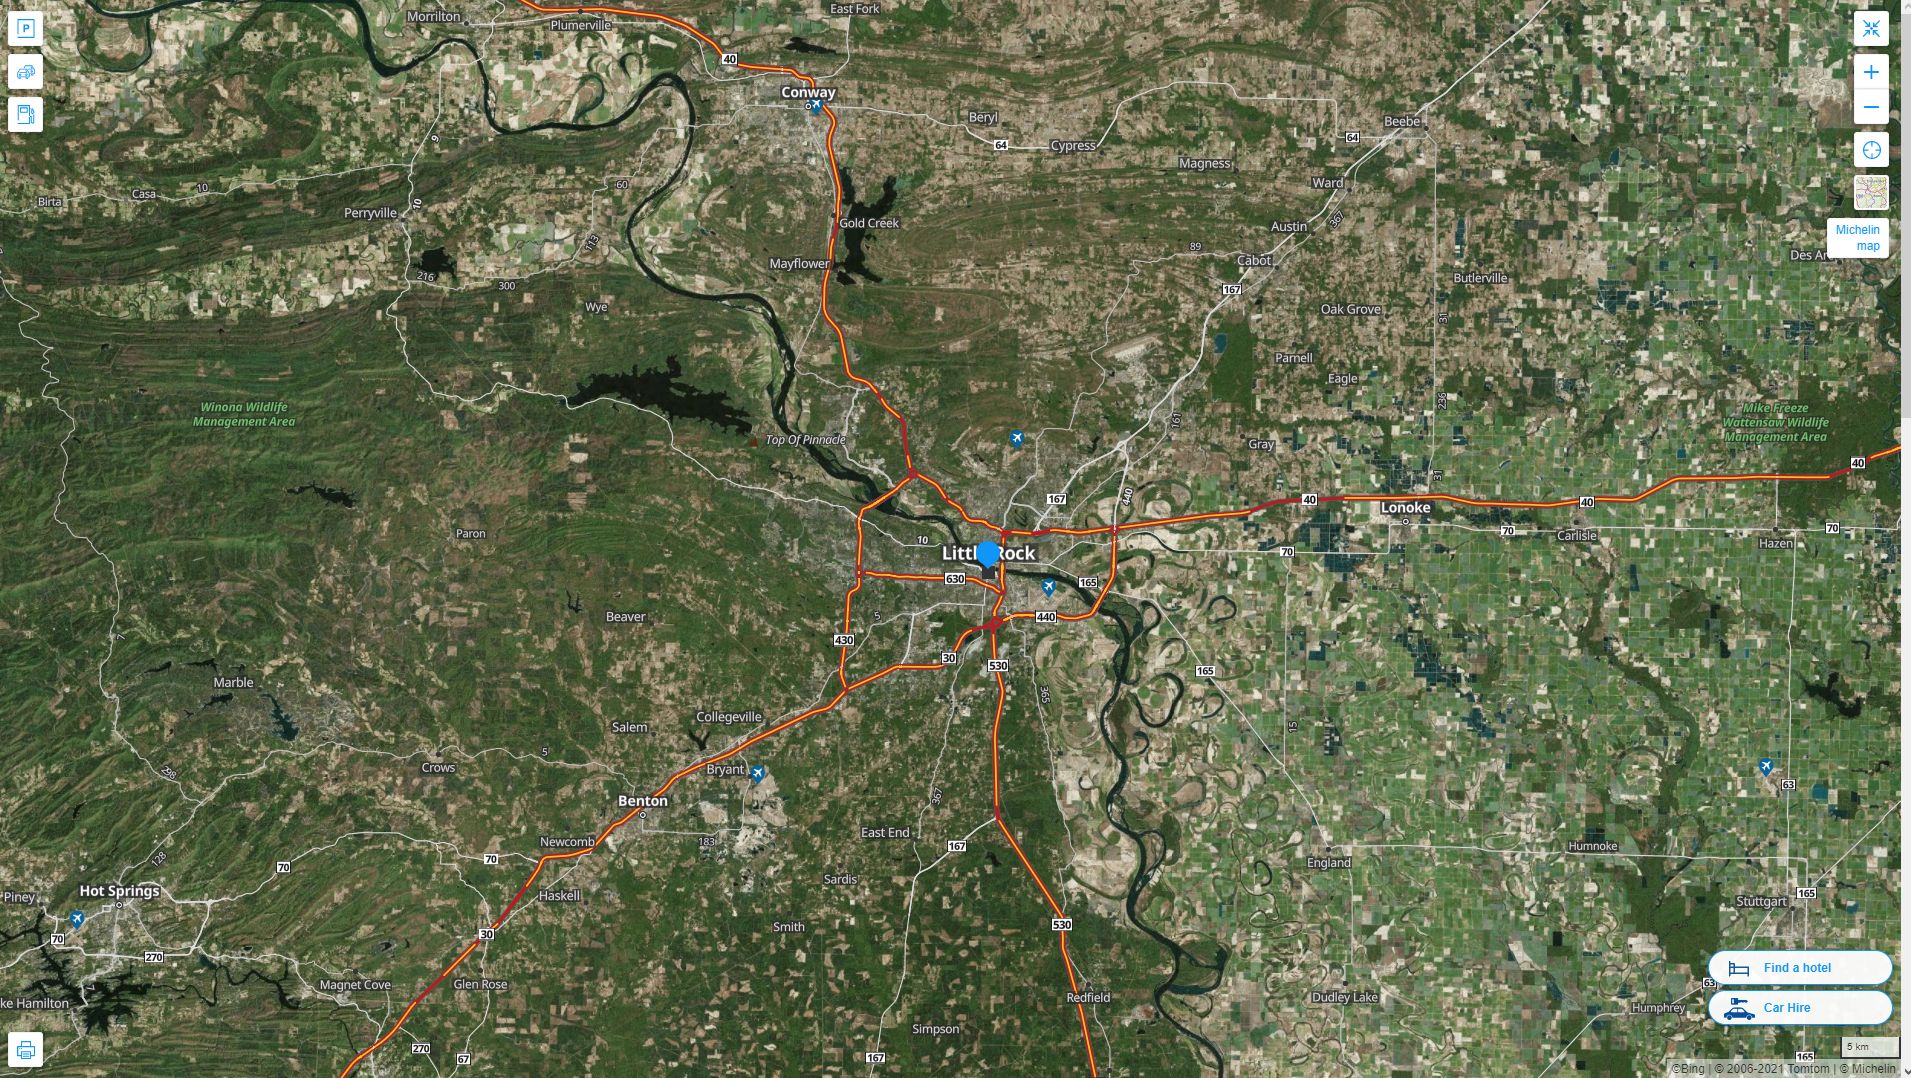 Little Rock Arkansas Highway and Road Map with Satellite View